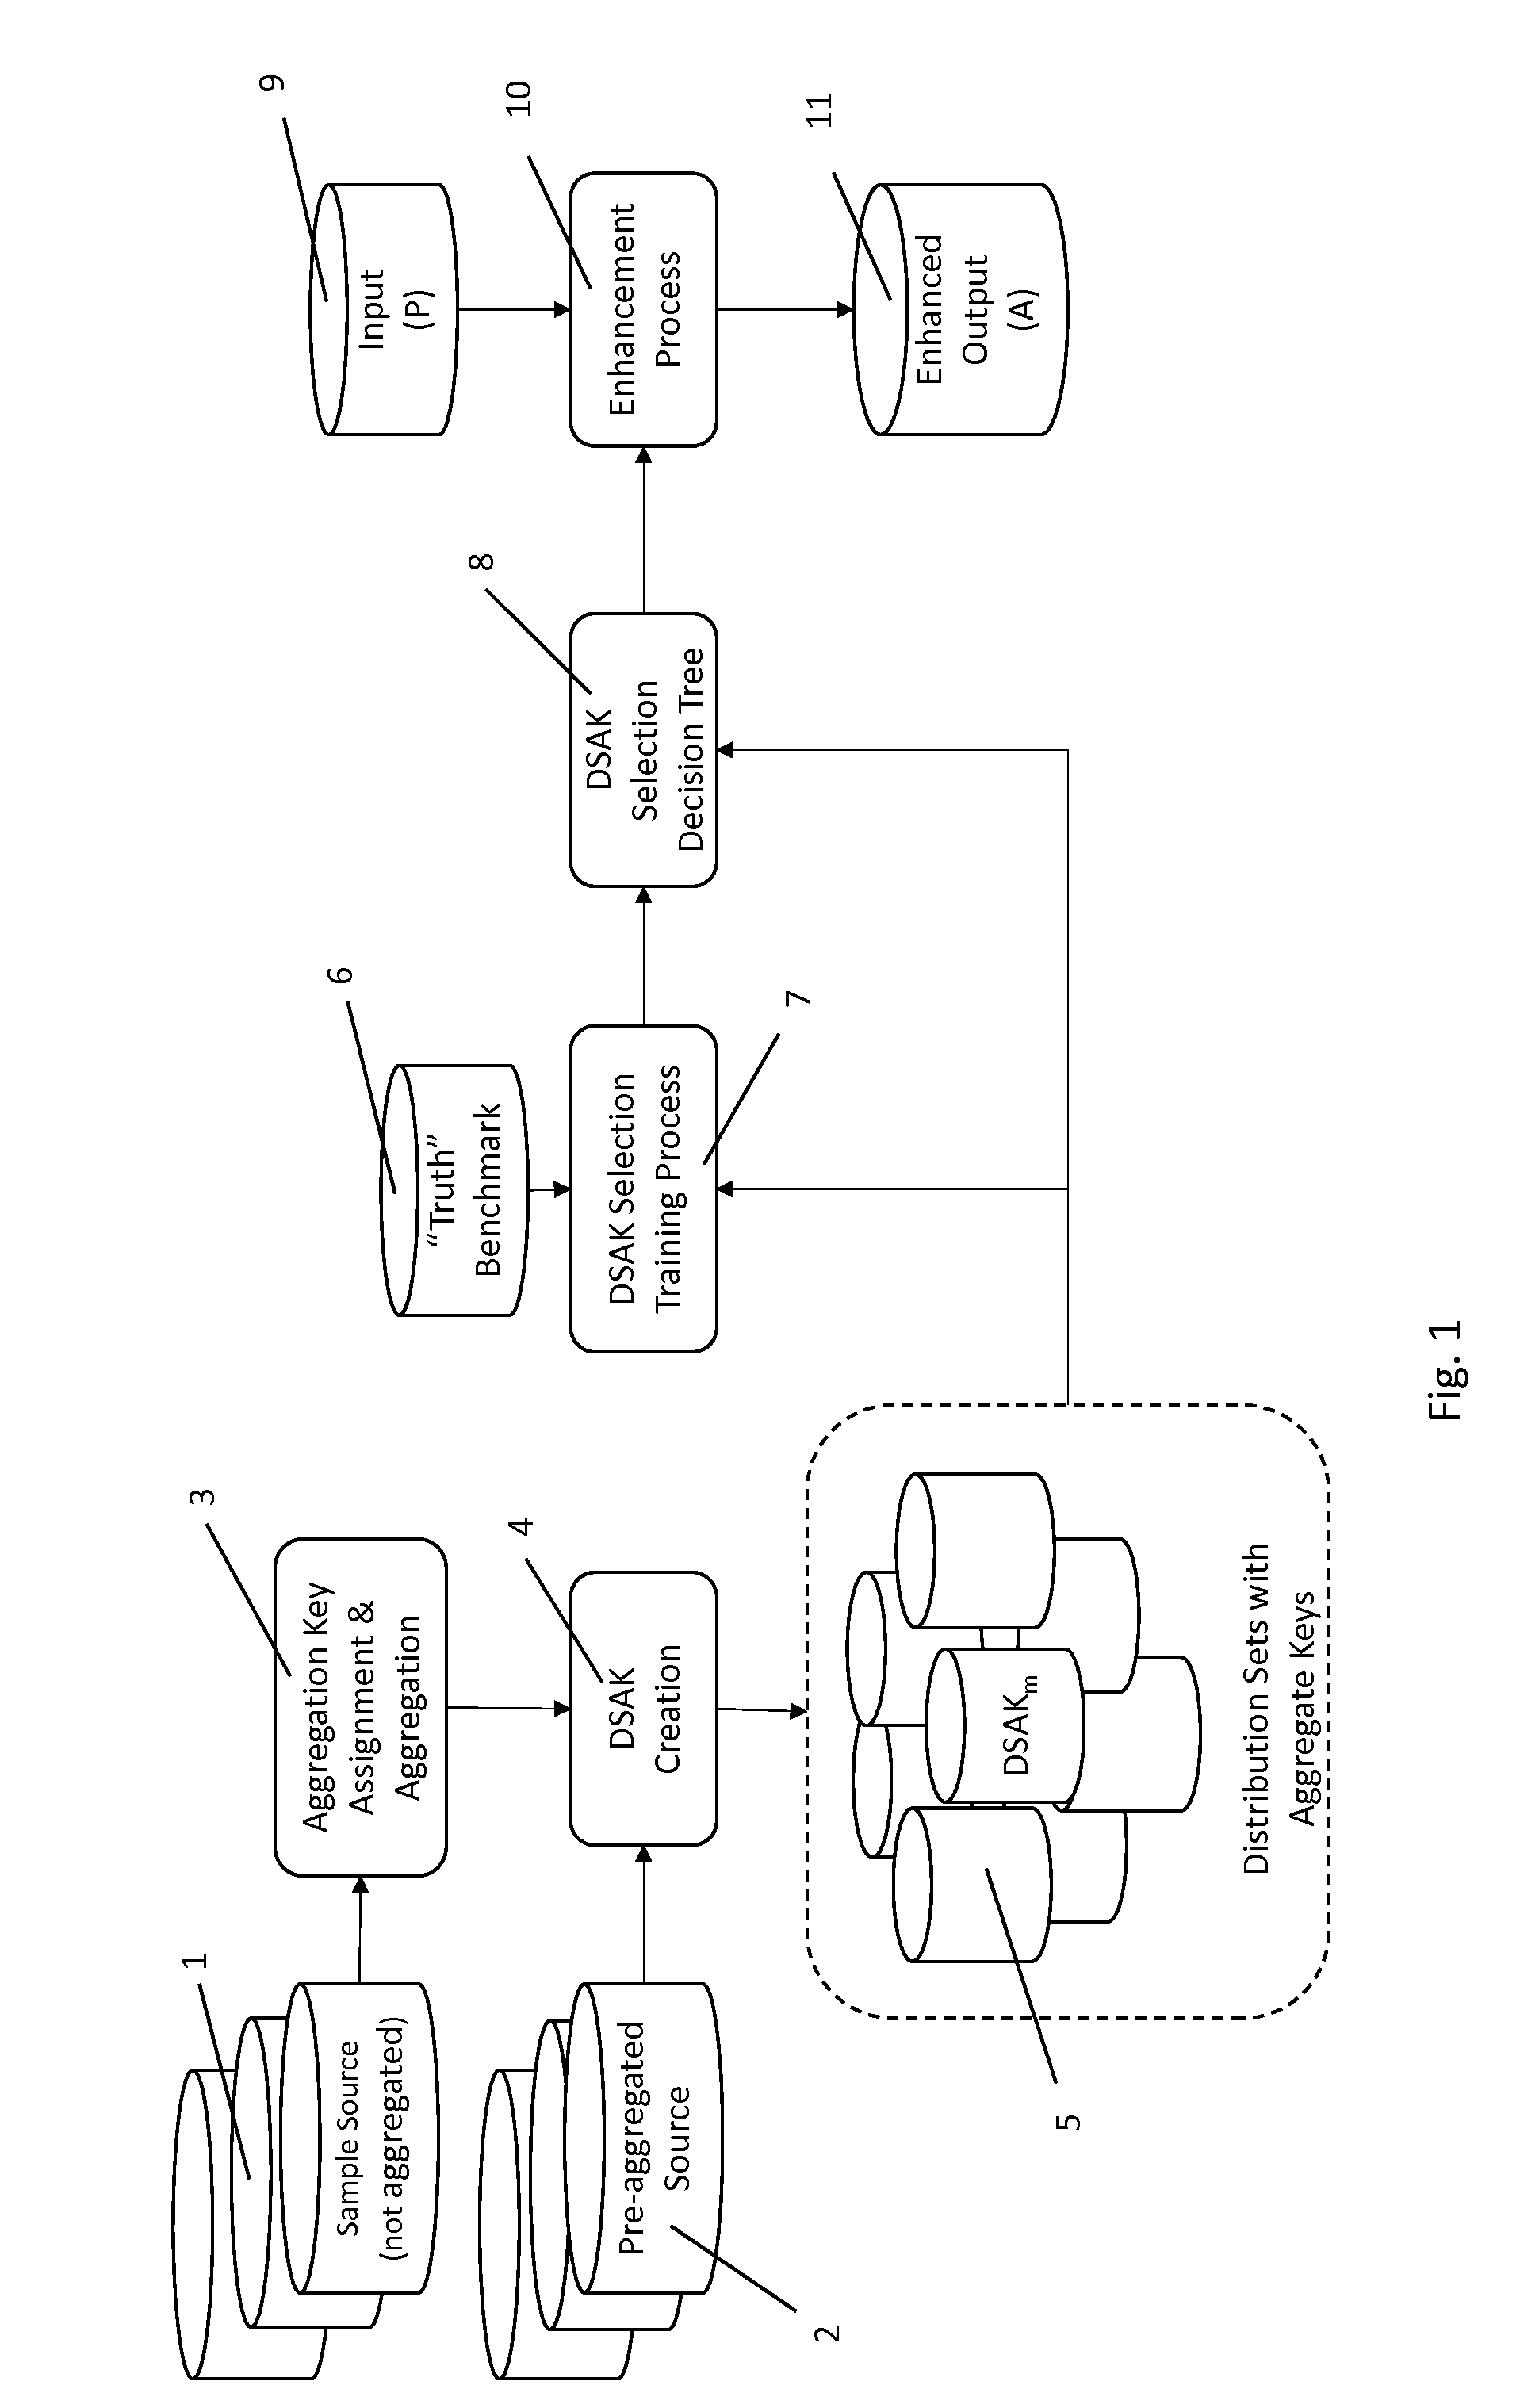 Apparatus and Method to Increase Accuracy in Individual Attributes Derived from Anonymous Aggregate Data